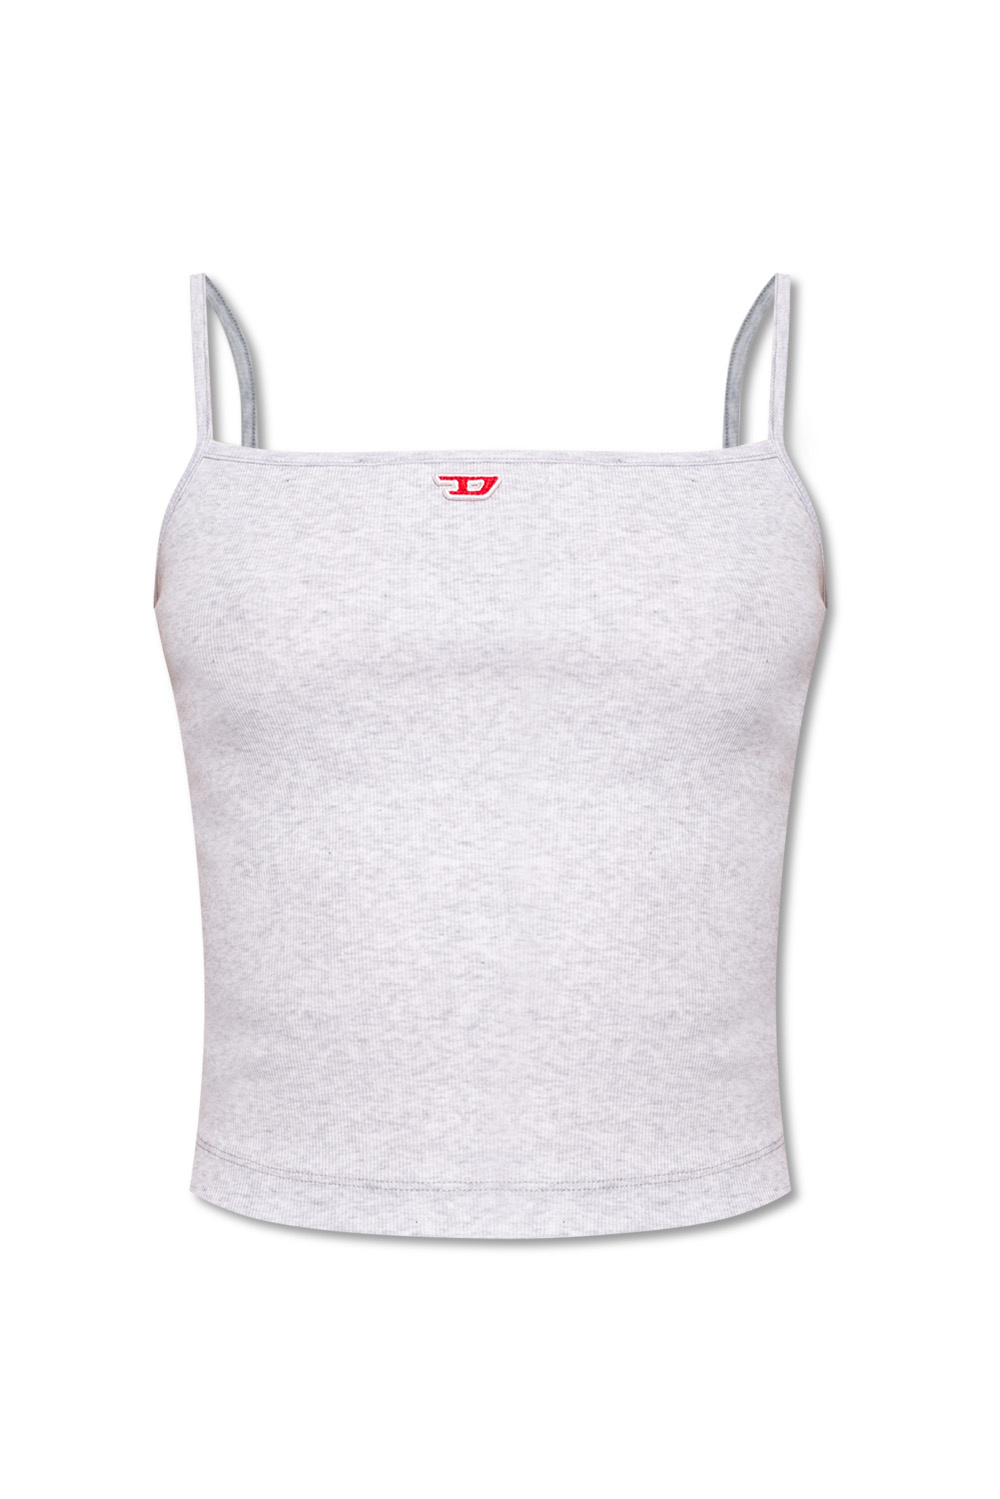 Diesel white bandeau top with cut-out D